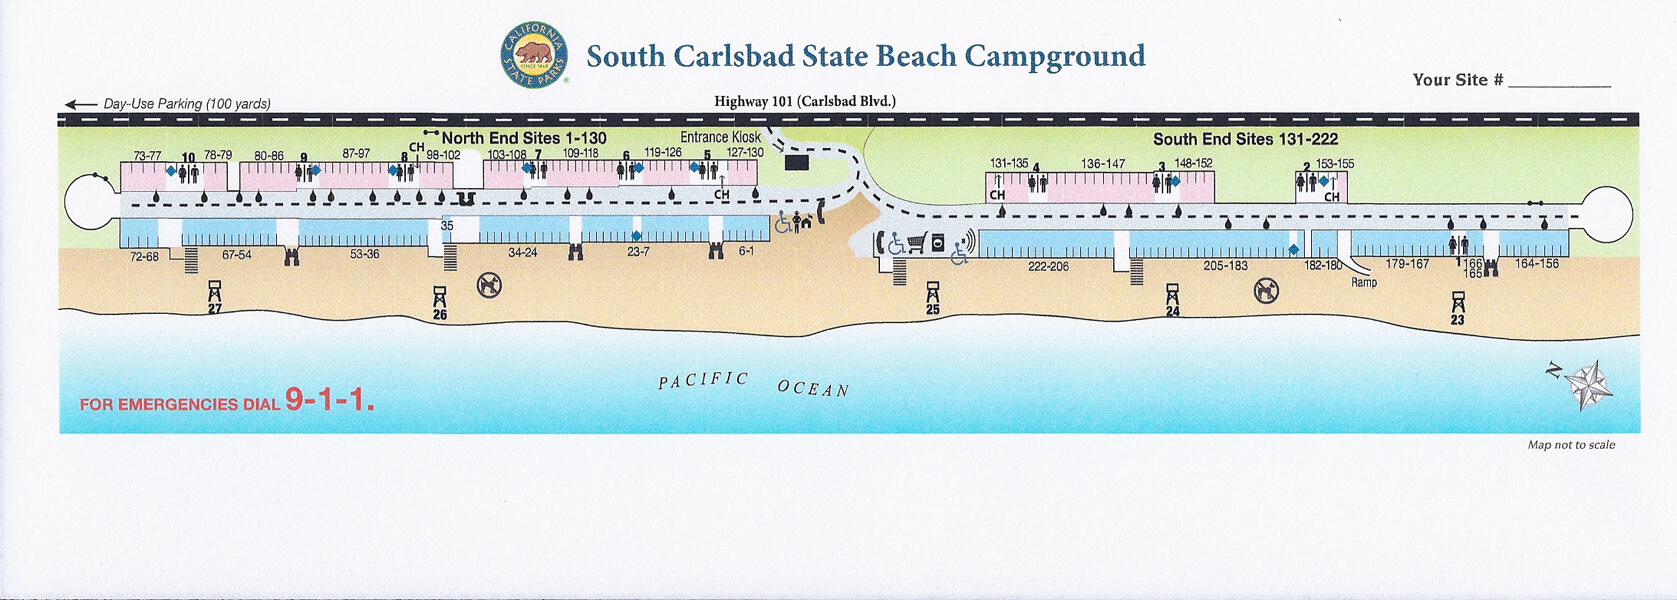 South carlsbad beach campground map